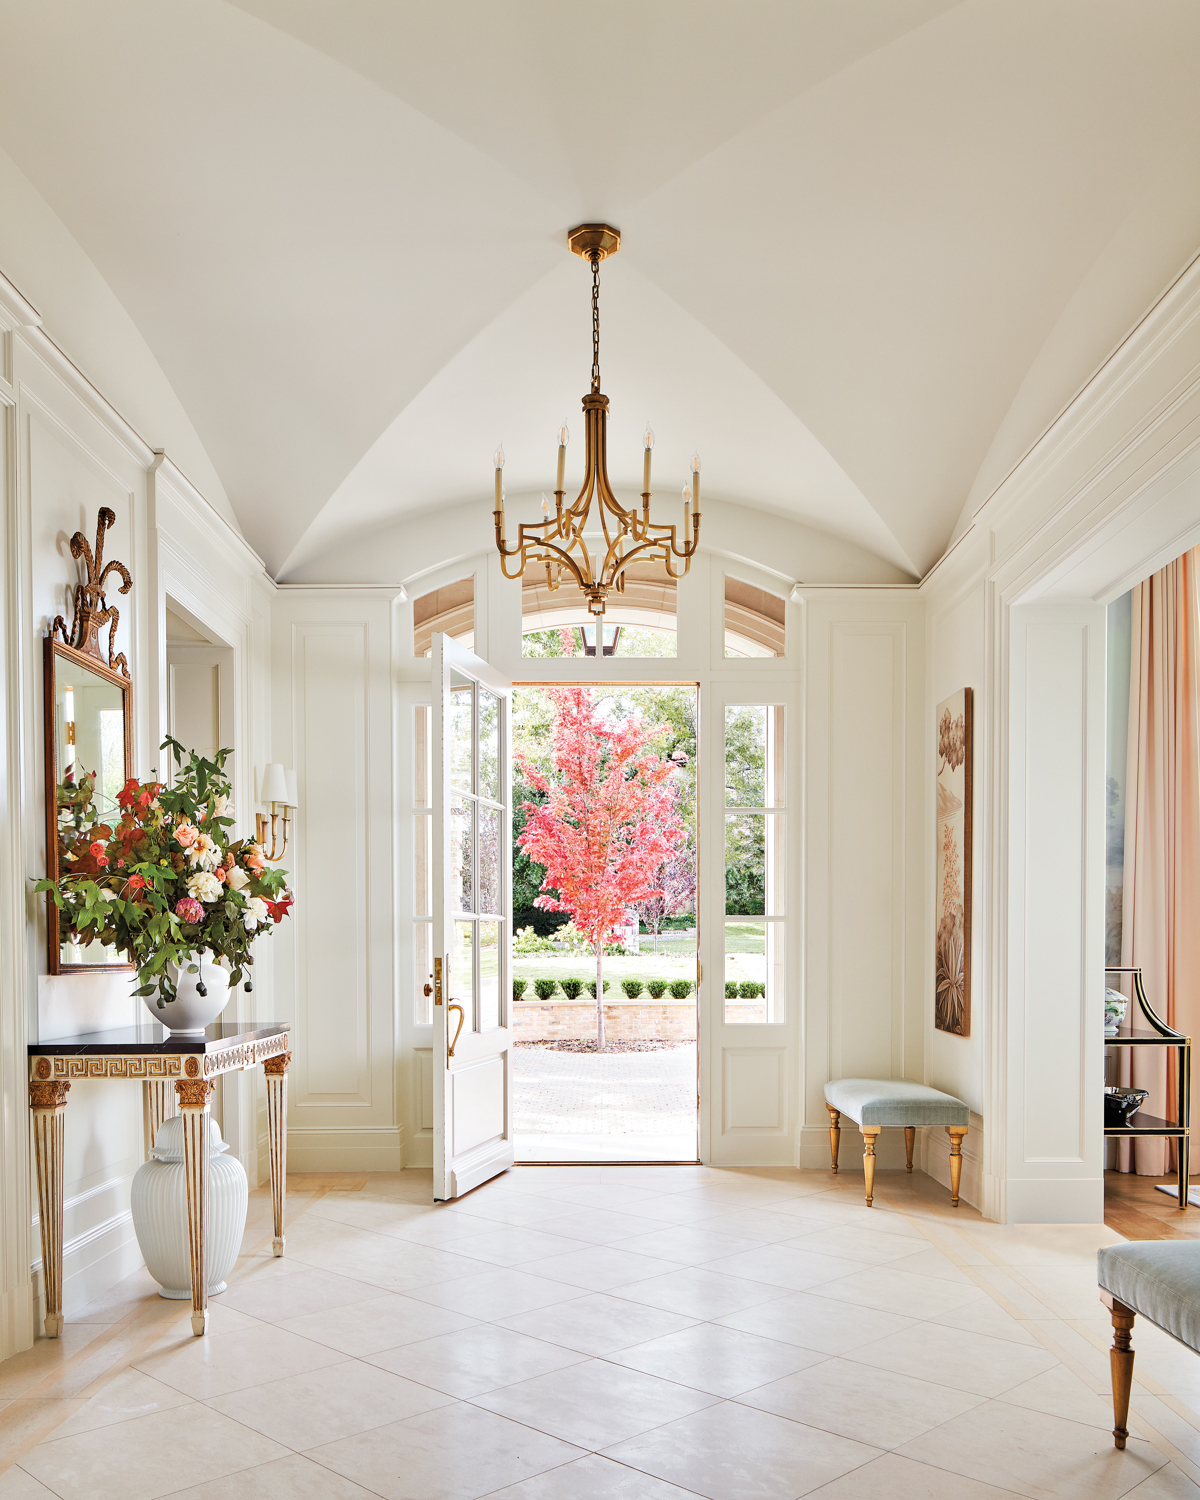 Entryway with a curved vaulted...